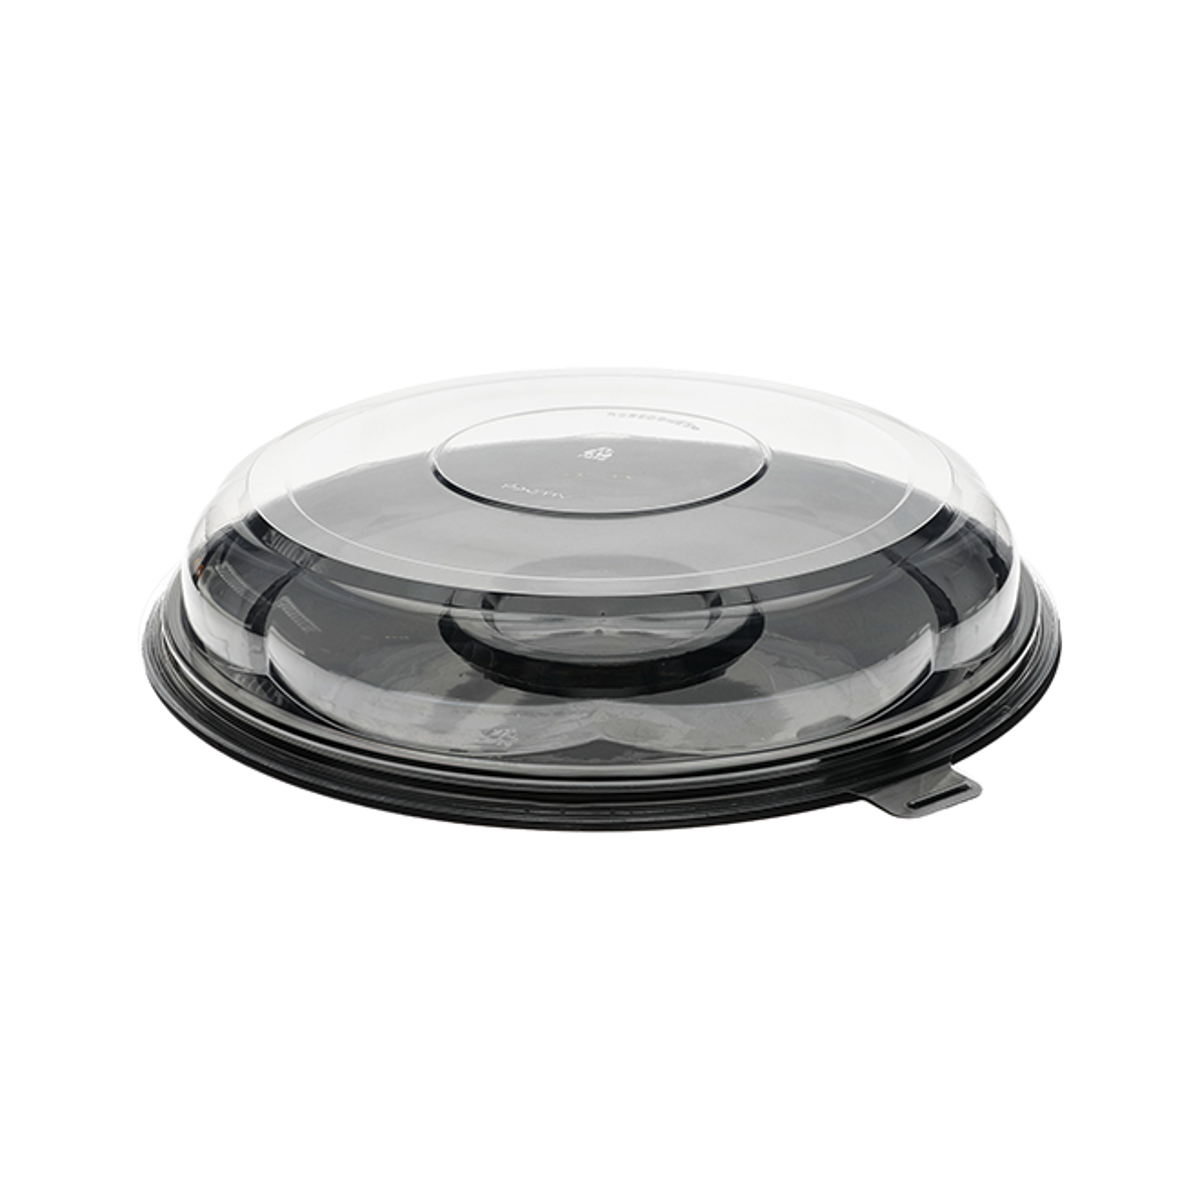 12” Lazy Susan Caterware Tray with 2.25” RoseDome Lid | Pactiv 